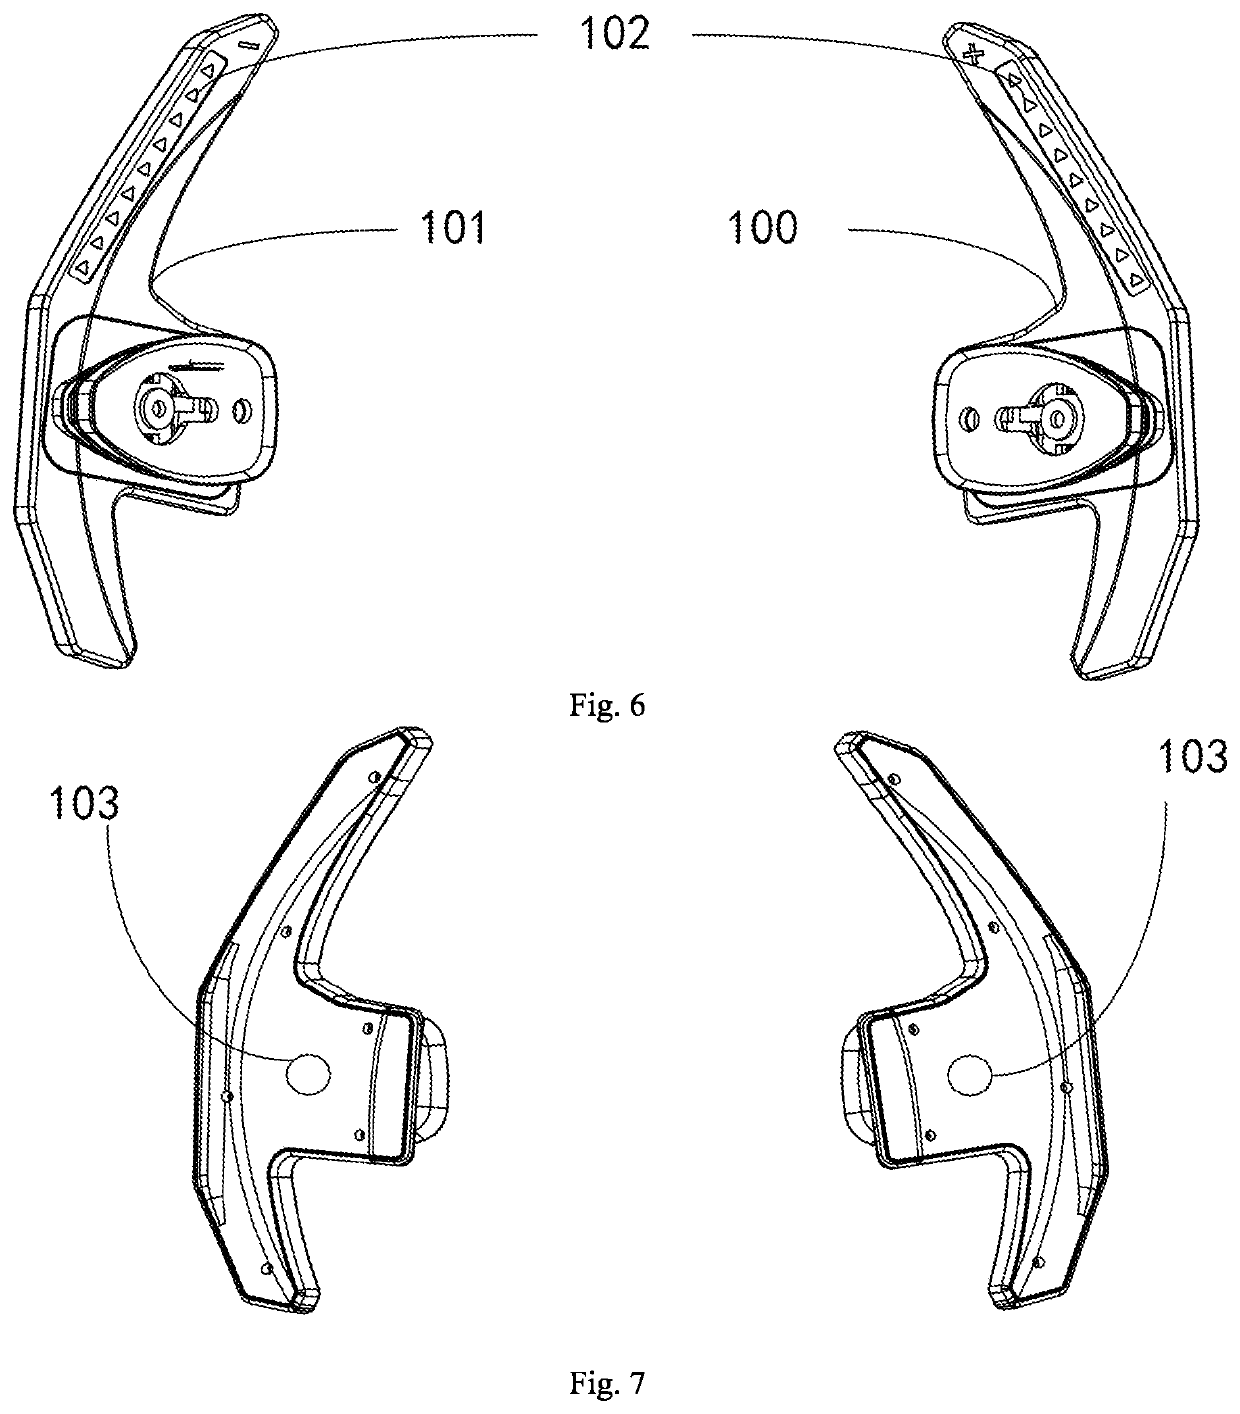 Steering wheel indicating paddle for displaying power rotating speed of automobile